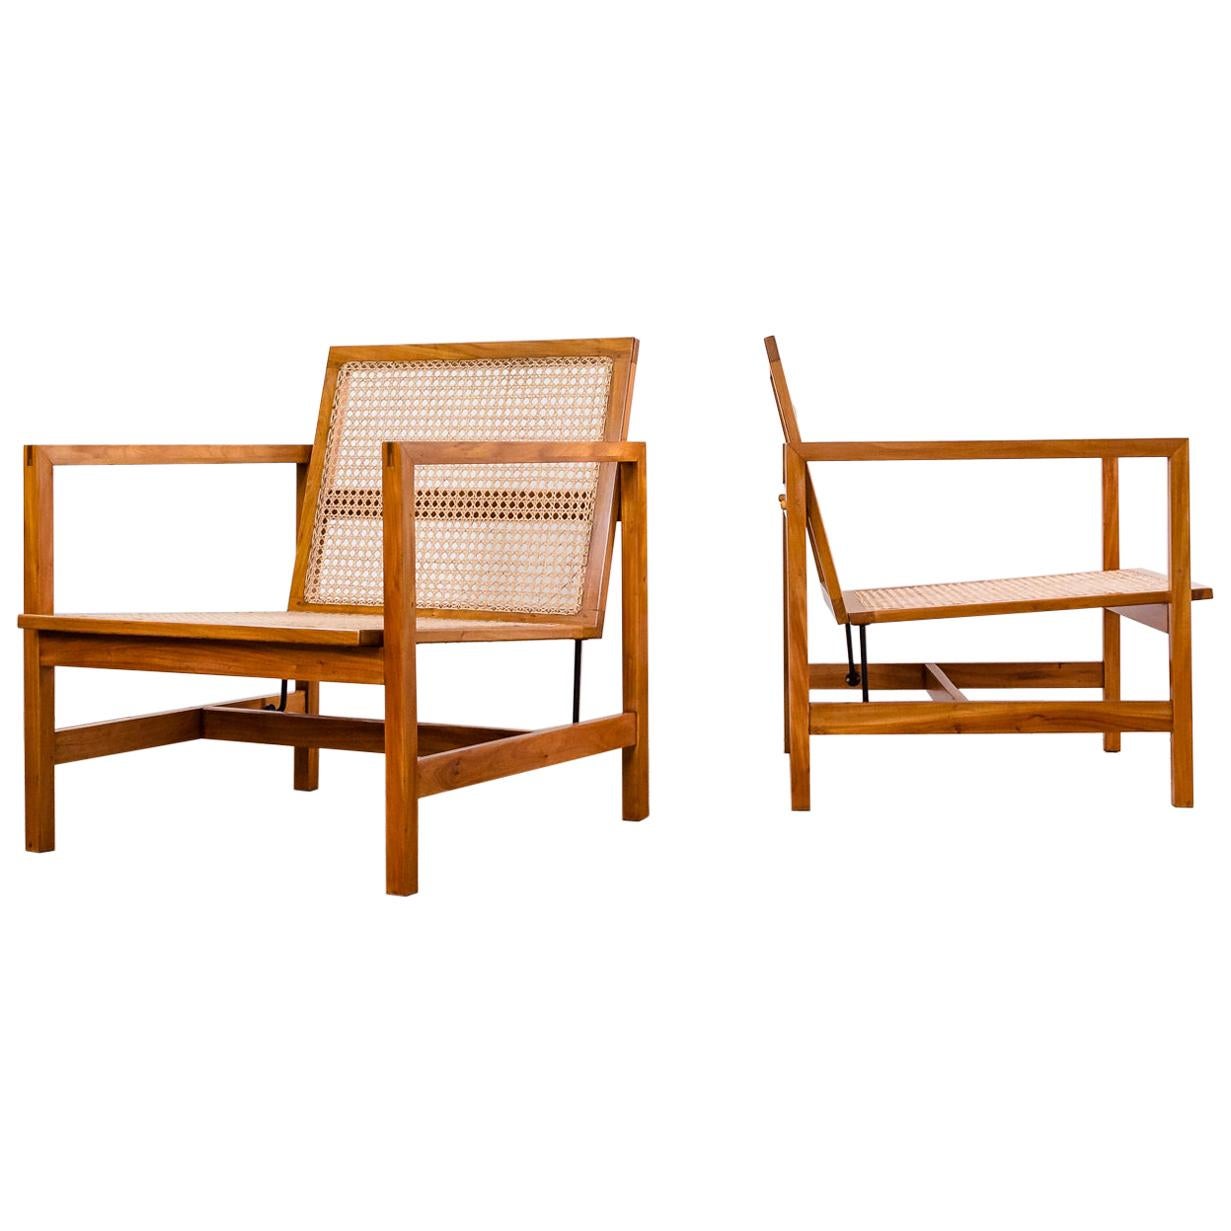 Brazilian Mid-Century Modern Lounge Chairs in Hardwood and Natural Cane